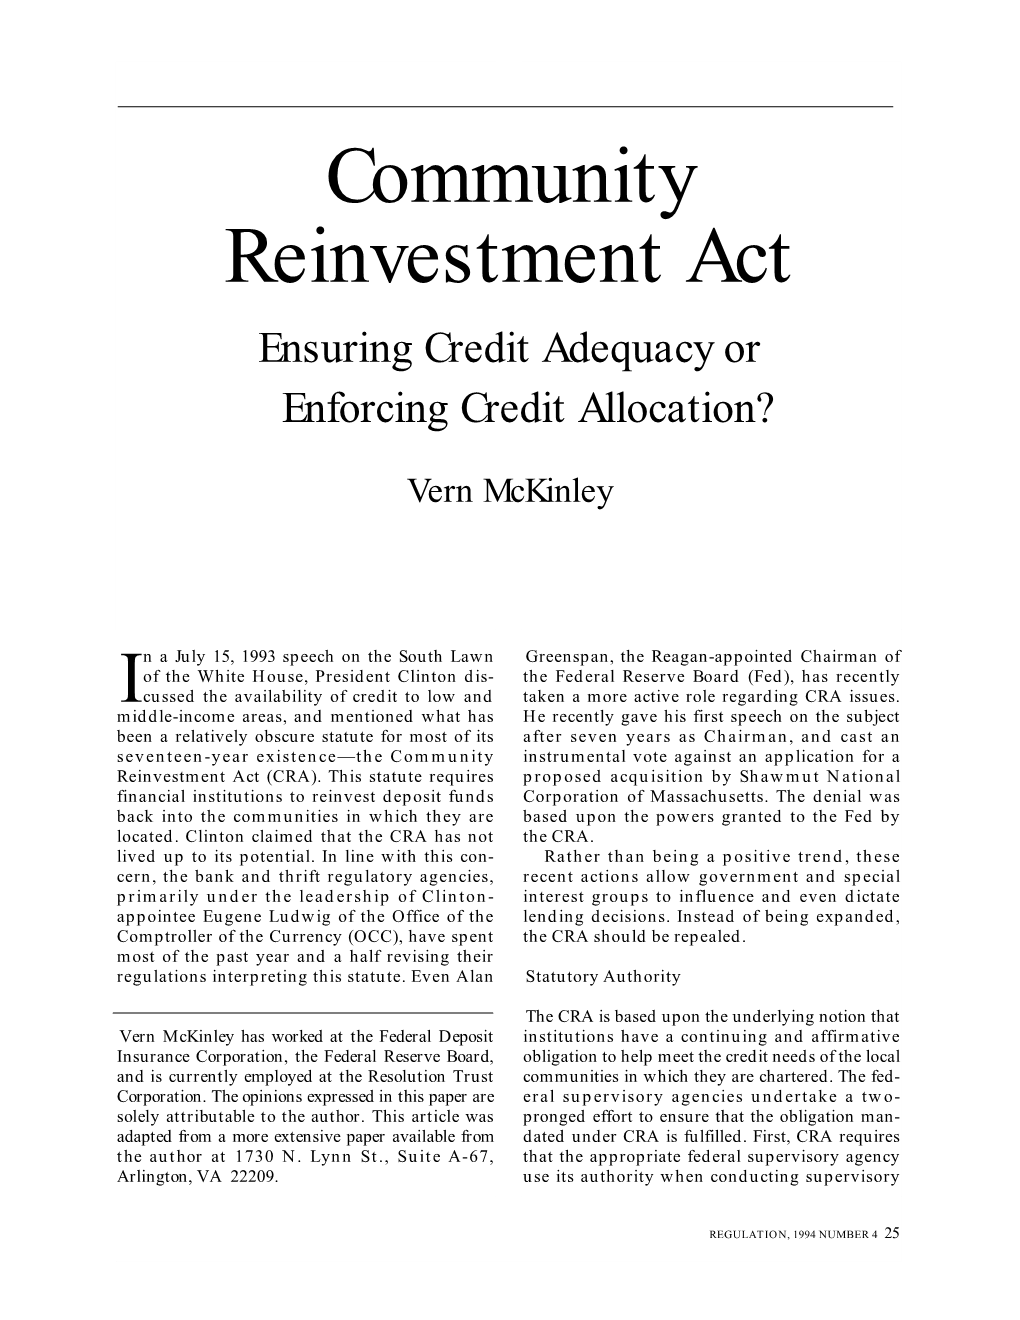 Community Reinvestment Act Ensuring Credit Adequacy Or Enforcing Credit Allocation?